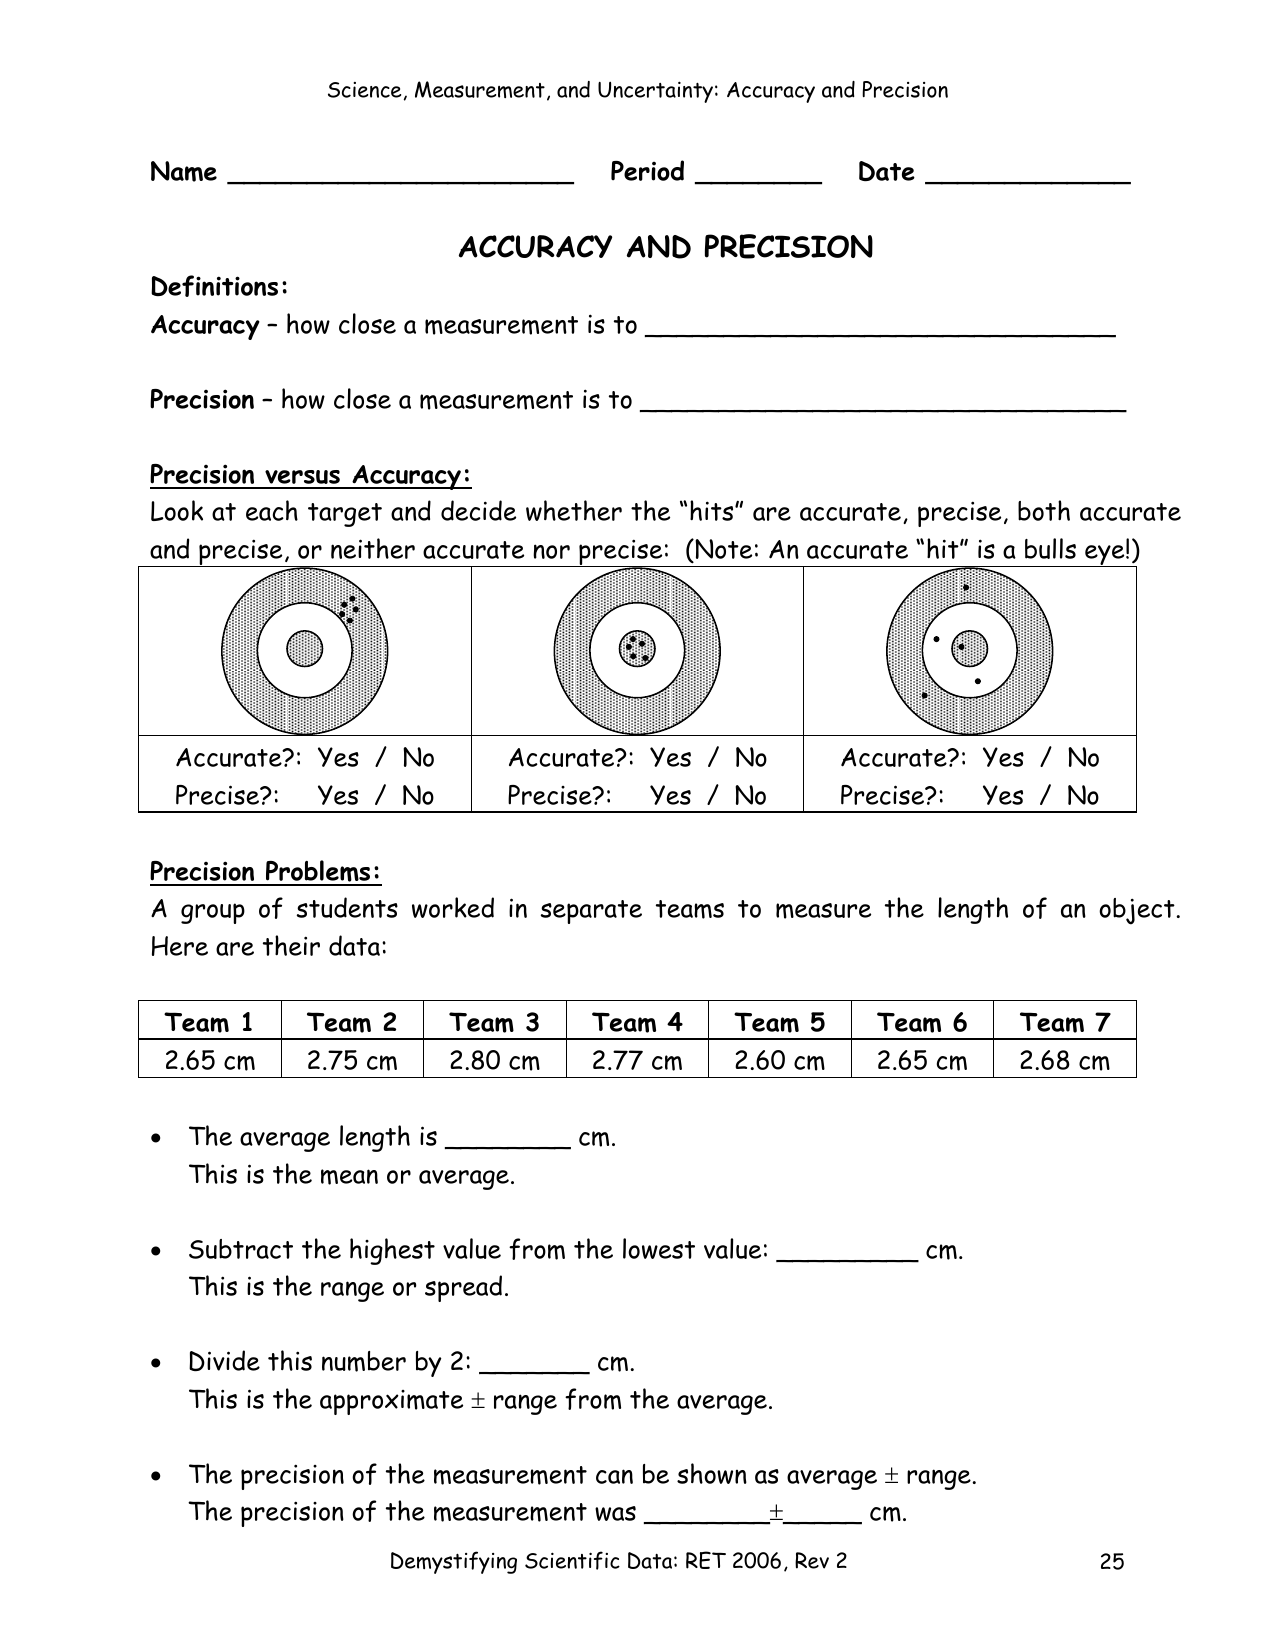 Worksheet-Accuracy and Precision-Final Intended For Accuracy And Precision Worksheet